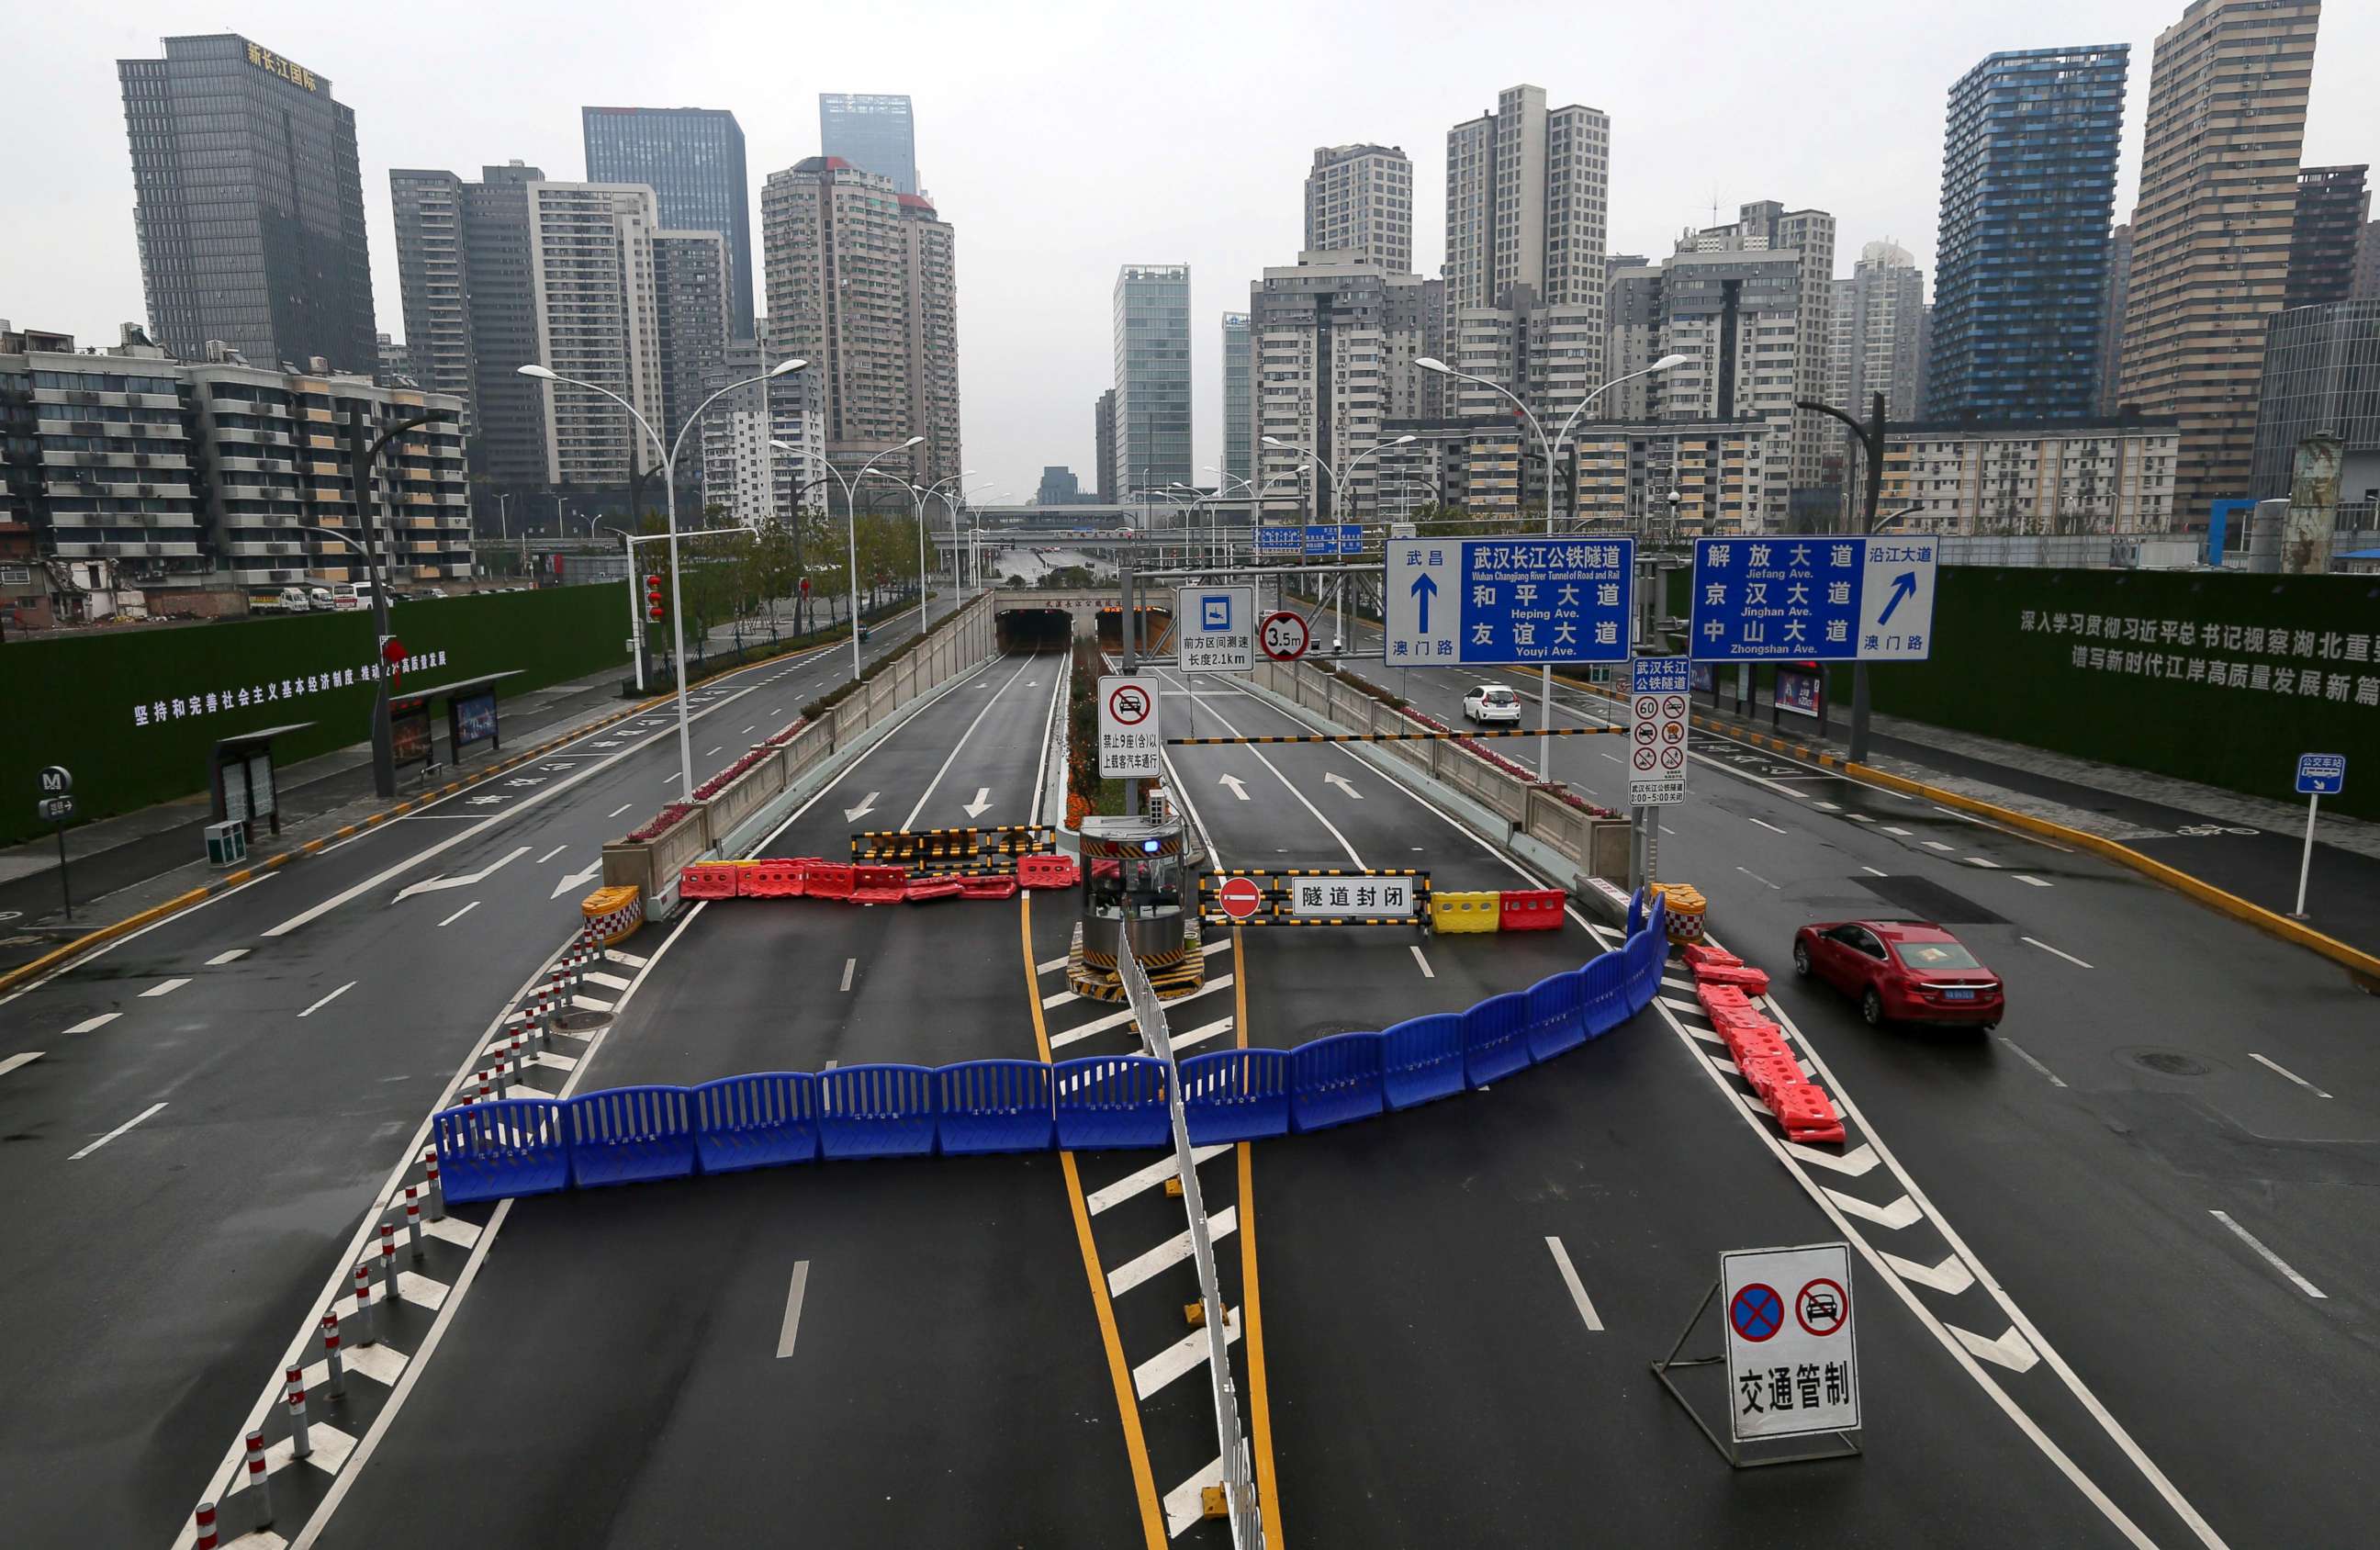 PHOTO: The Wuhan Yangtze River Tunnel is blocked with a barrier following an outbreak of the new coronavirus and the city's lockdown, in Wuhan, China on Jan. 25, 2020.